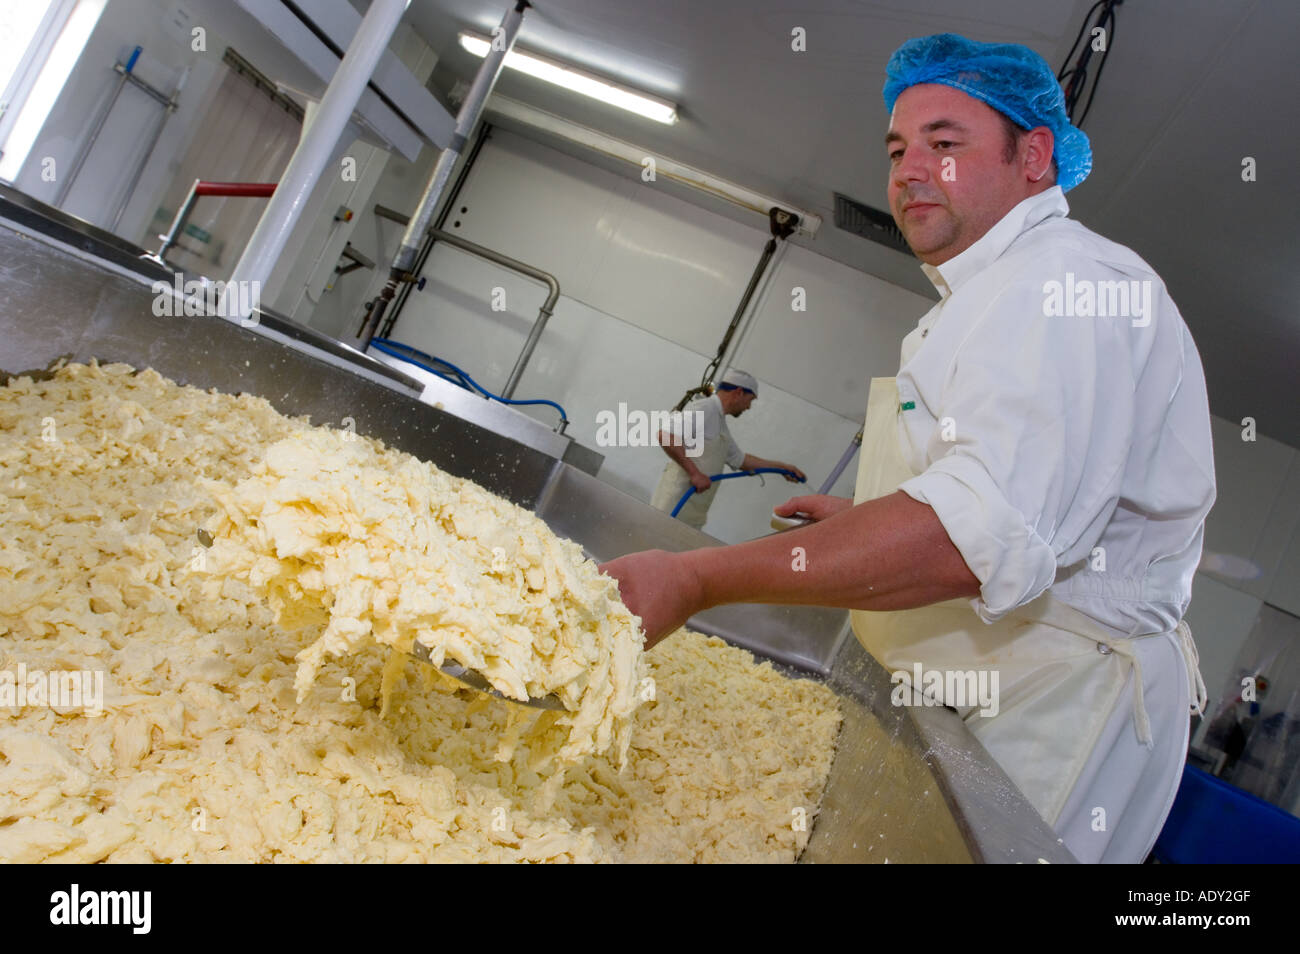 Stirring the curd to mix in salt during the making of Traditional Farmhouse Cheddar Cheese Westcombe Dairy Evercreech Somerset Stock Photo